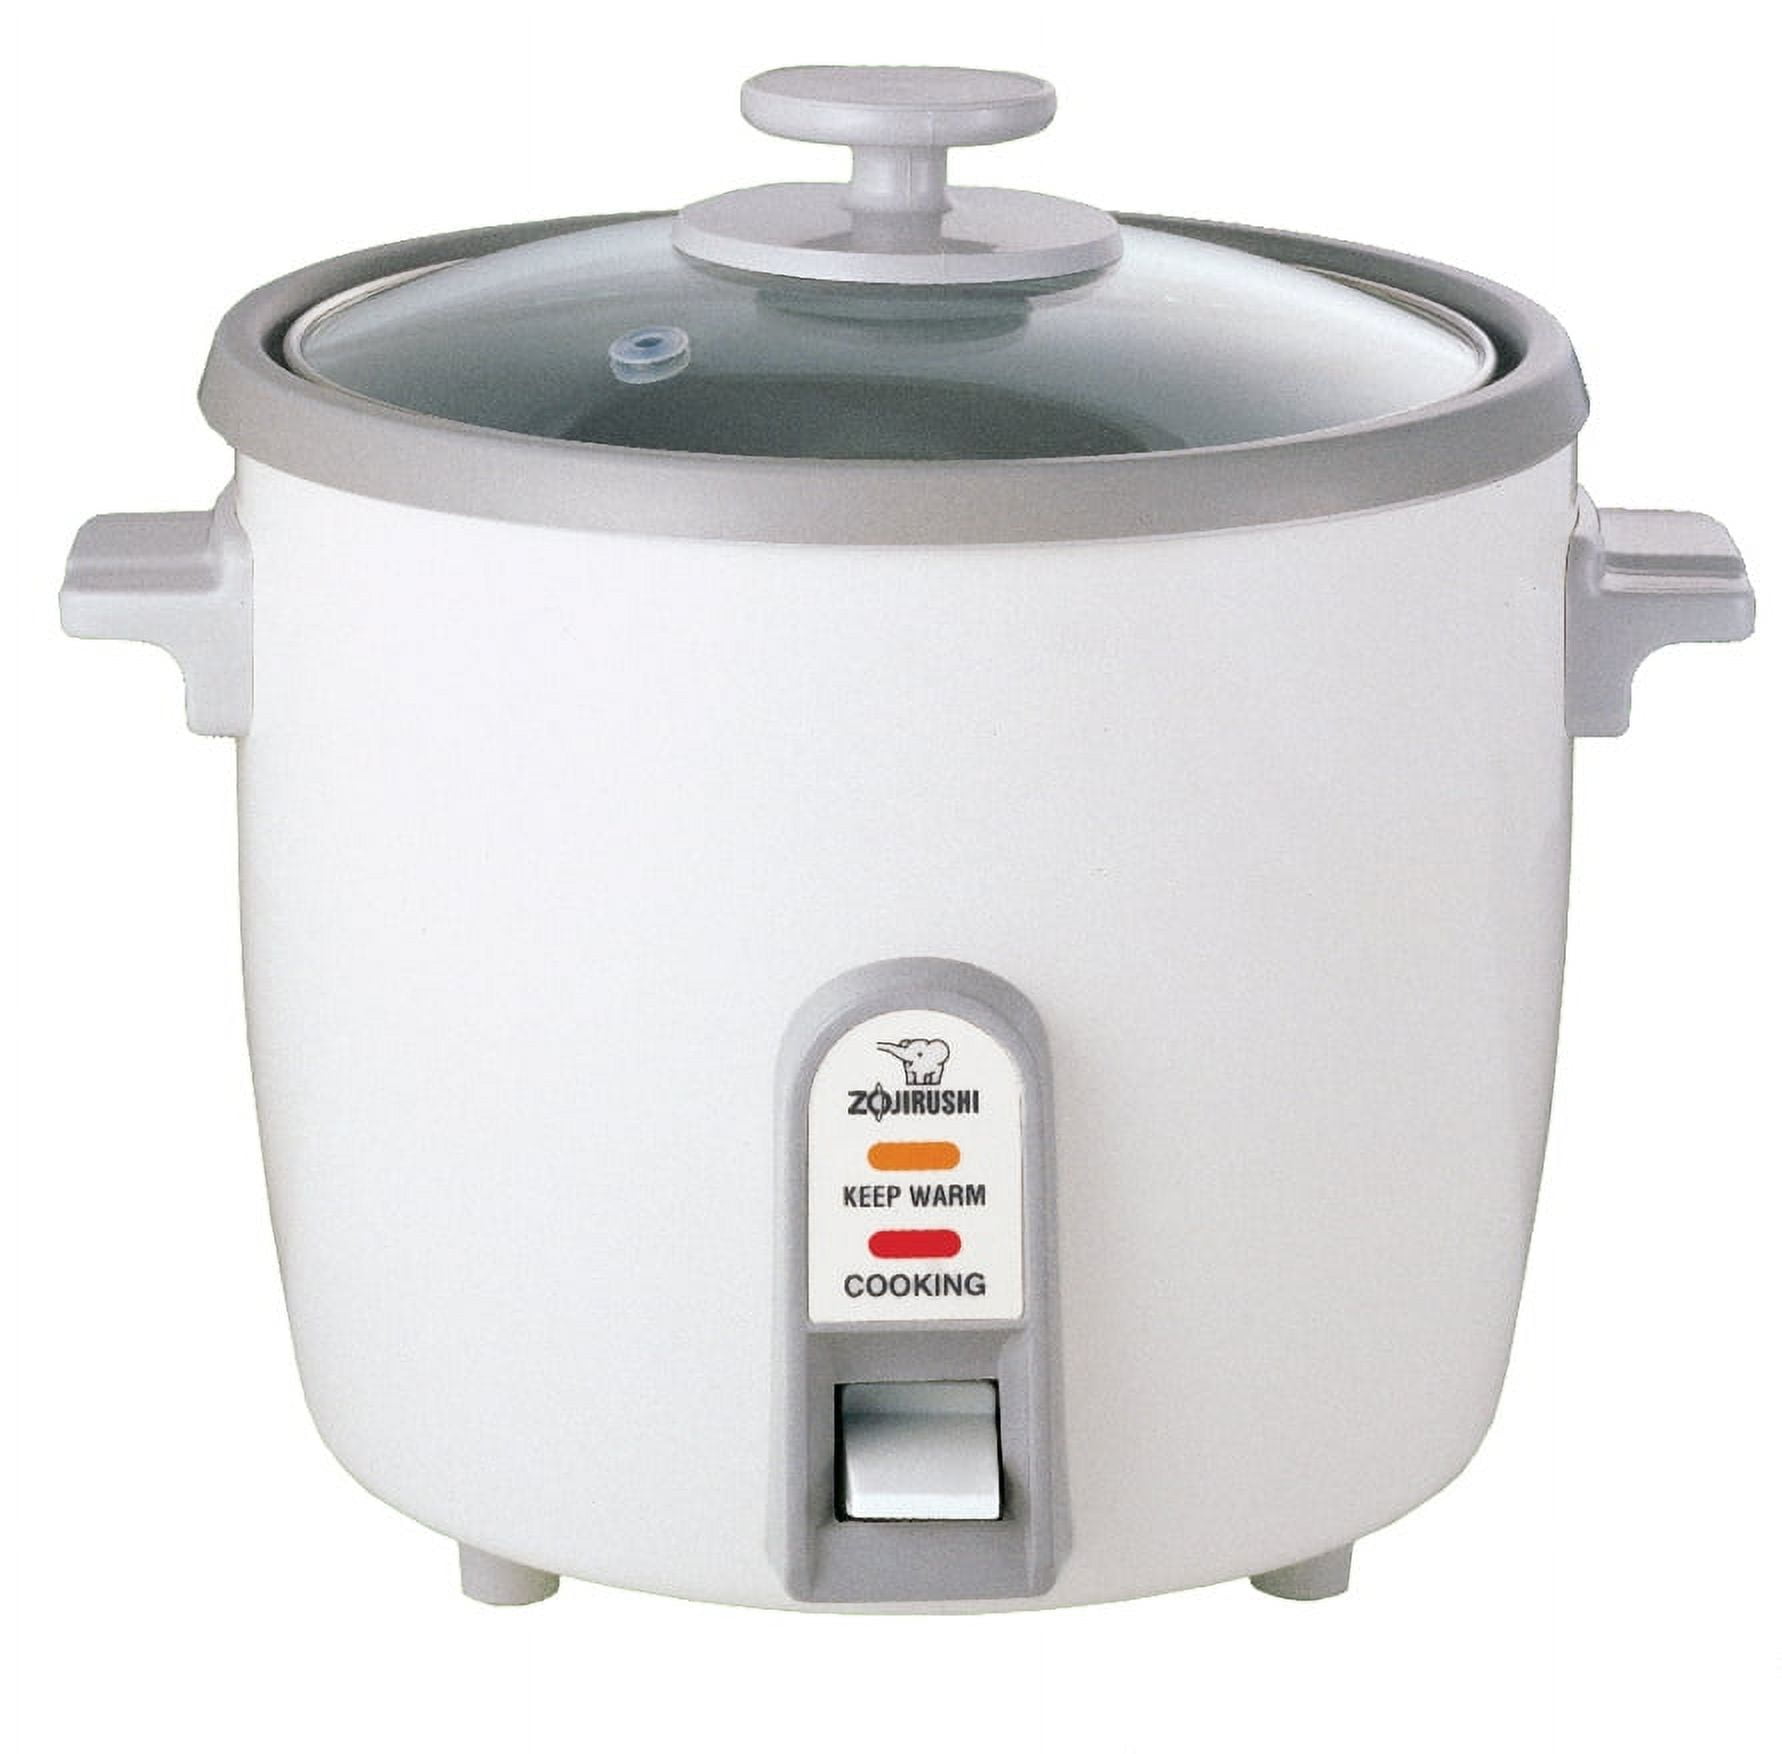 Is a rice cooker zojirushi np-hbc10 safe to use around birds